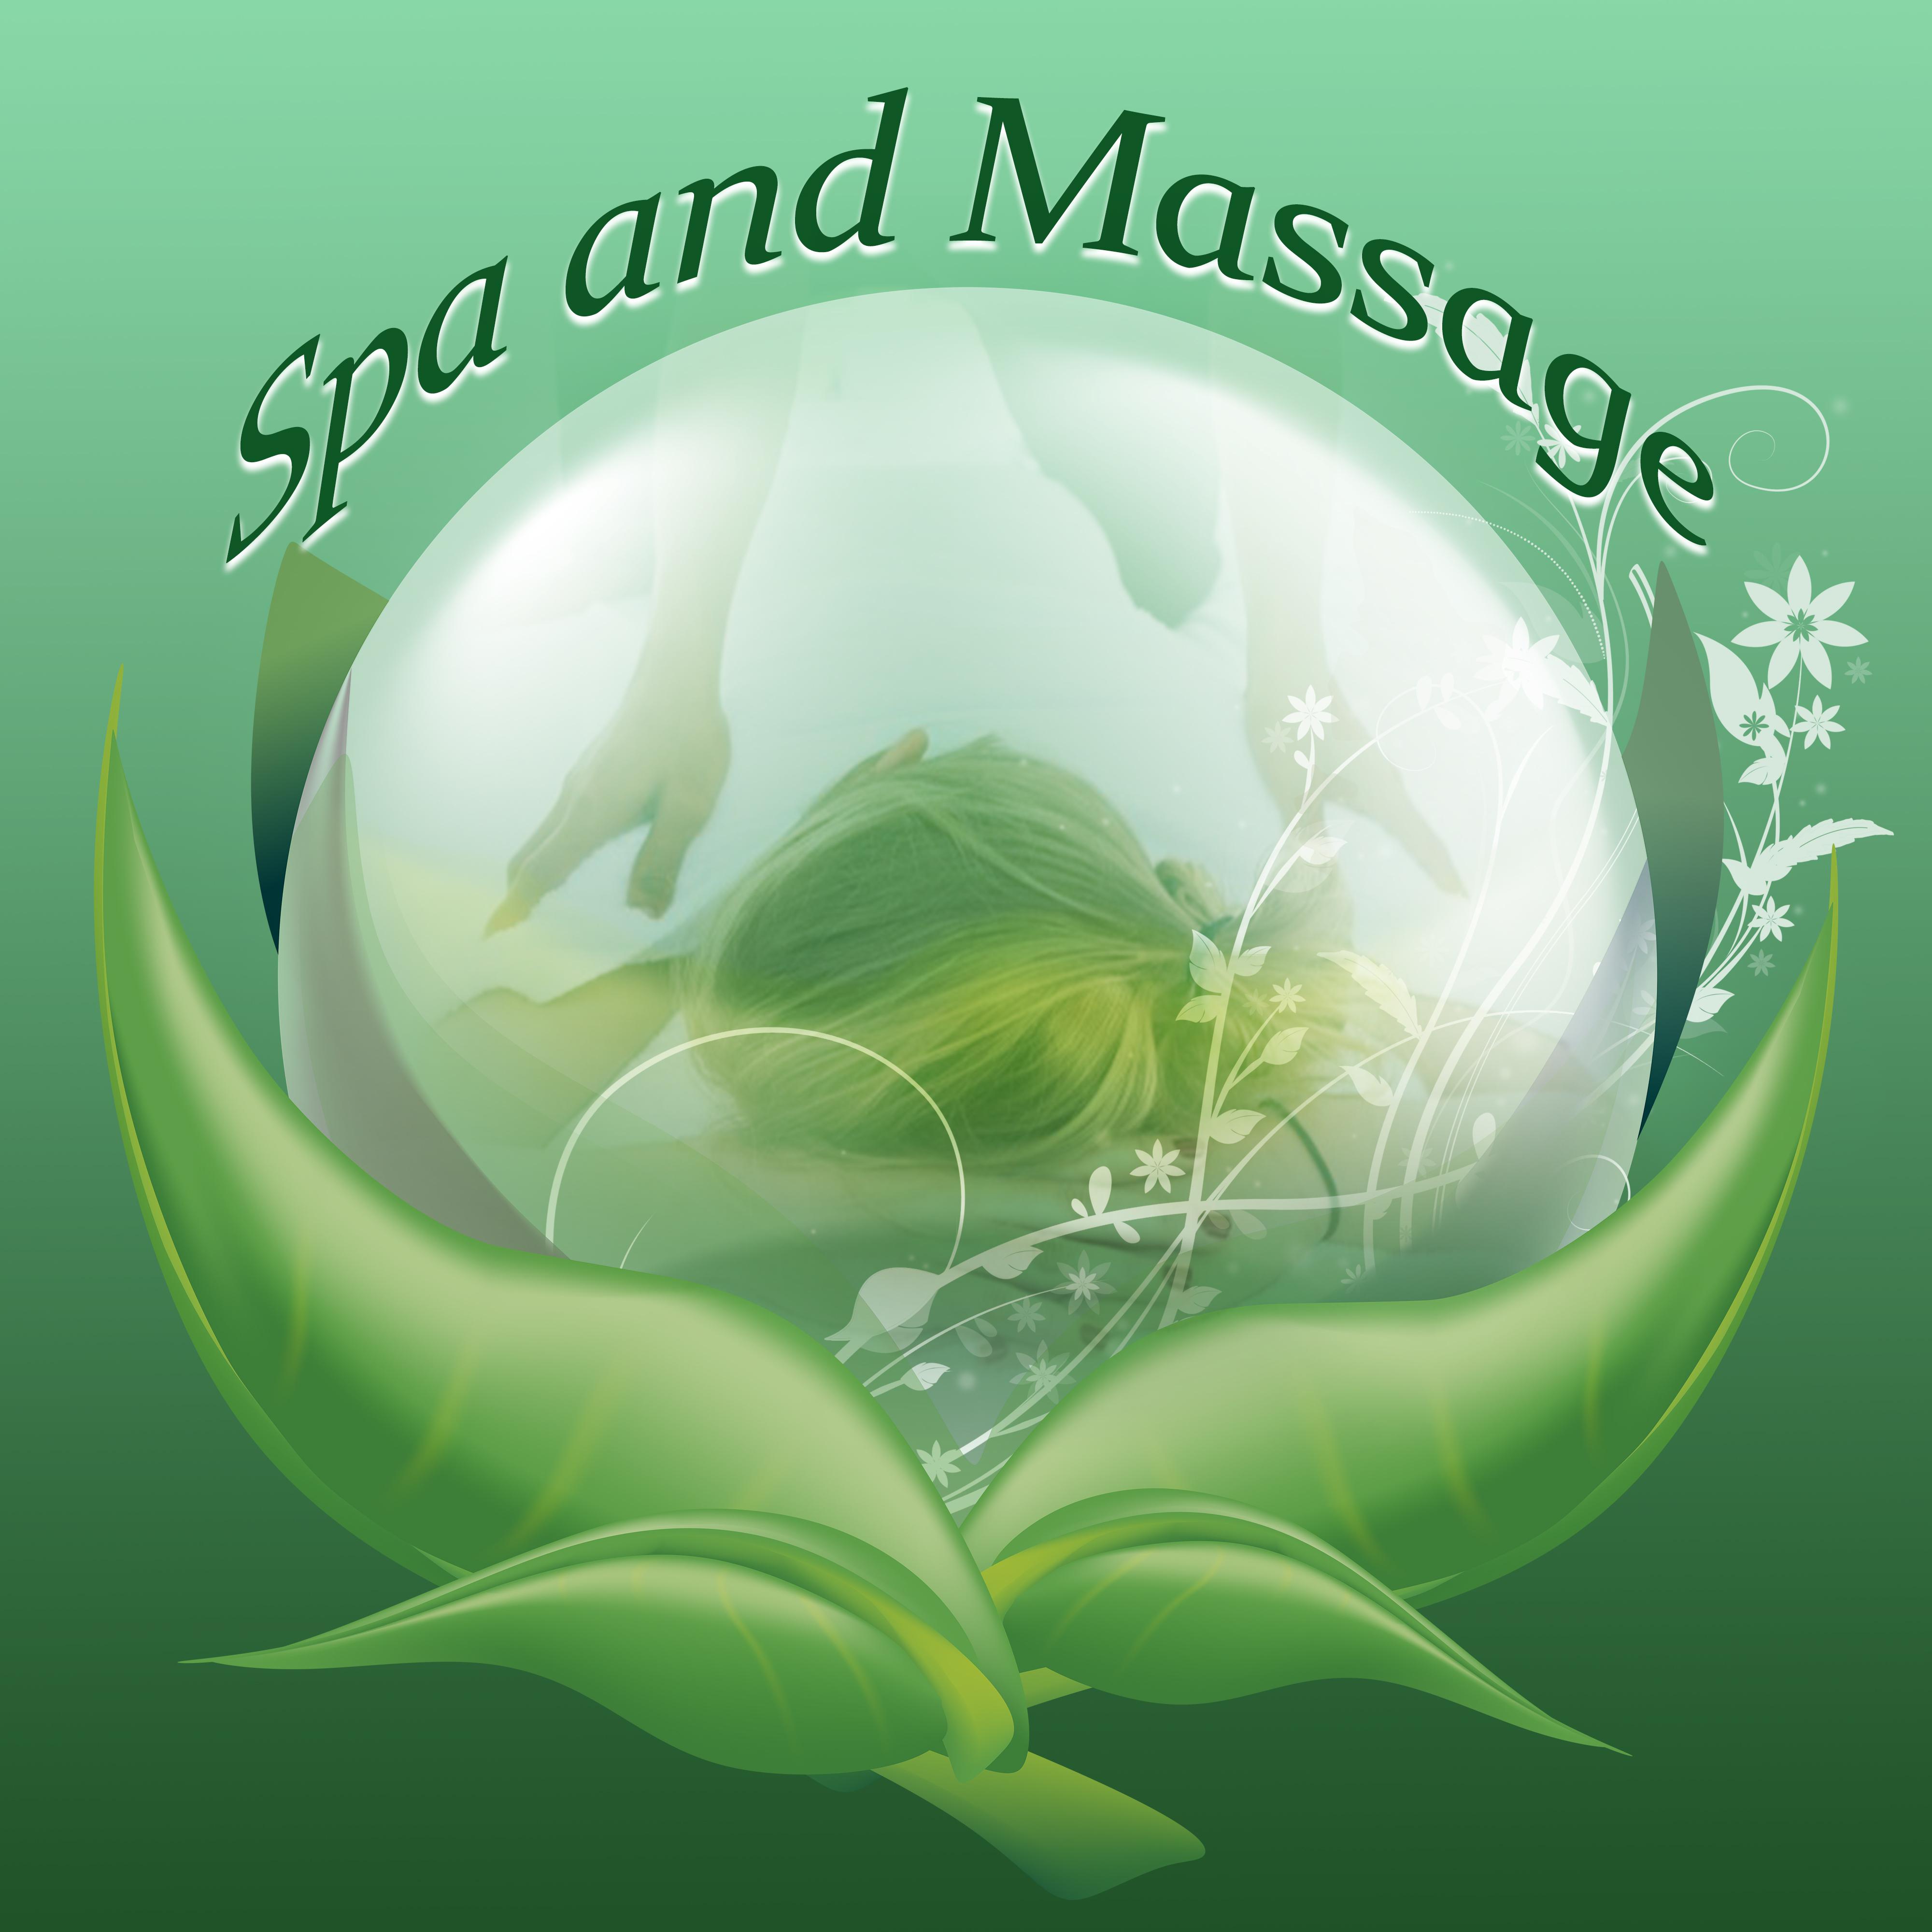 Spa and Massage – Nature Spa Music, Sounds for Relaxation, Relax After Work